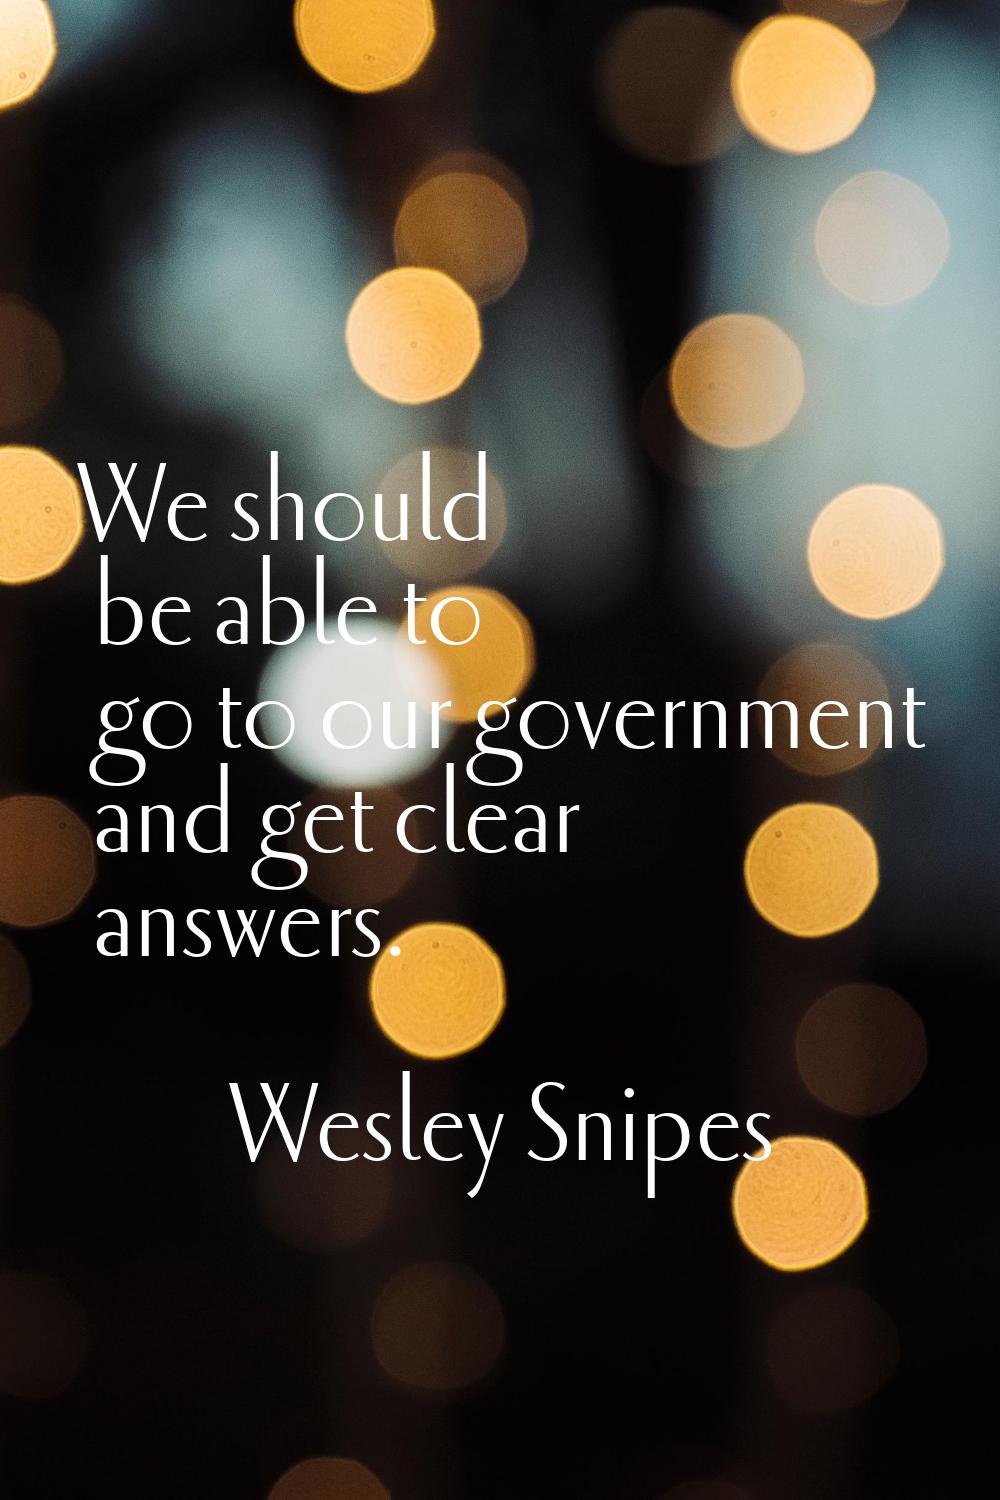 We should be able to go to our government and get clear answers.